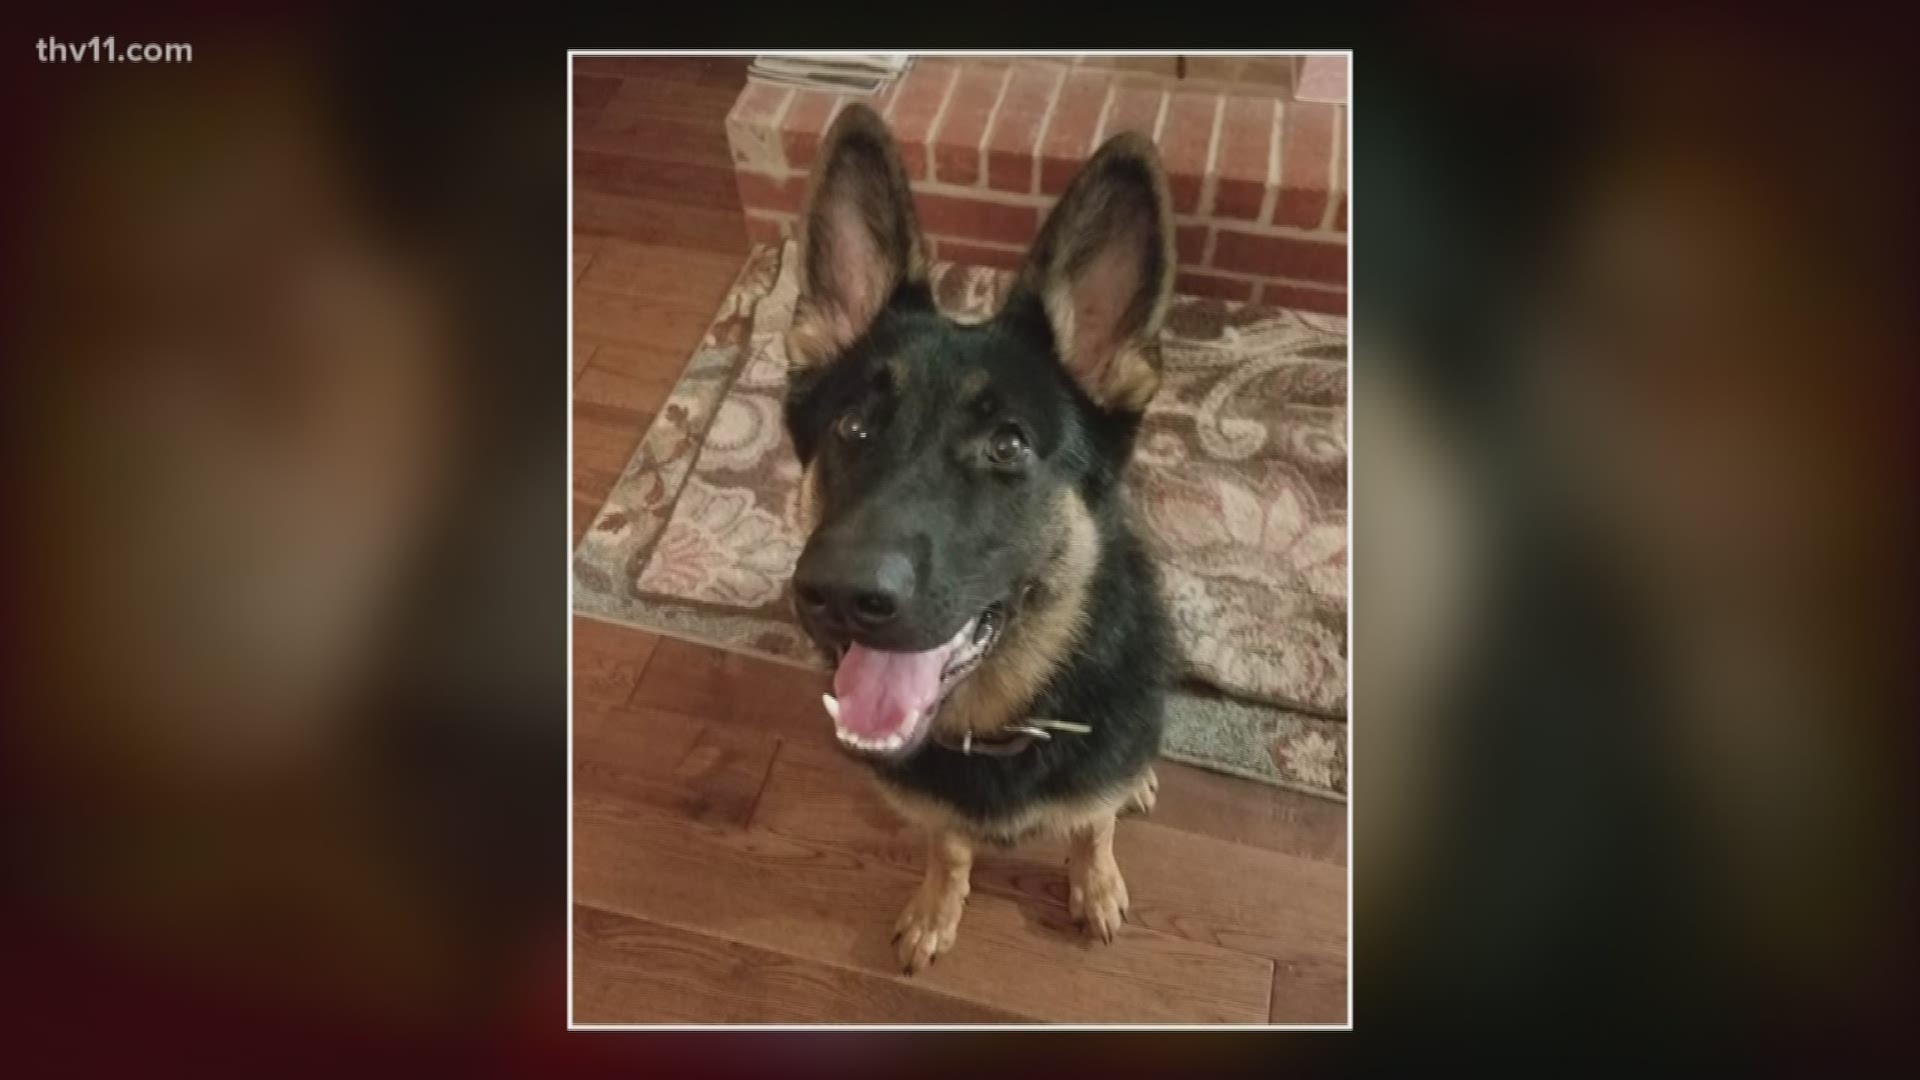 The fate of a lost German Shepherd puppy has caused a legal battle in Pulaski County - one that's now headed to the 8th Circuit Court of Appeals.